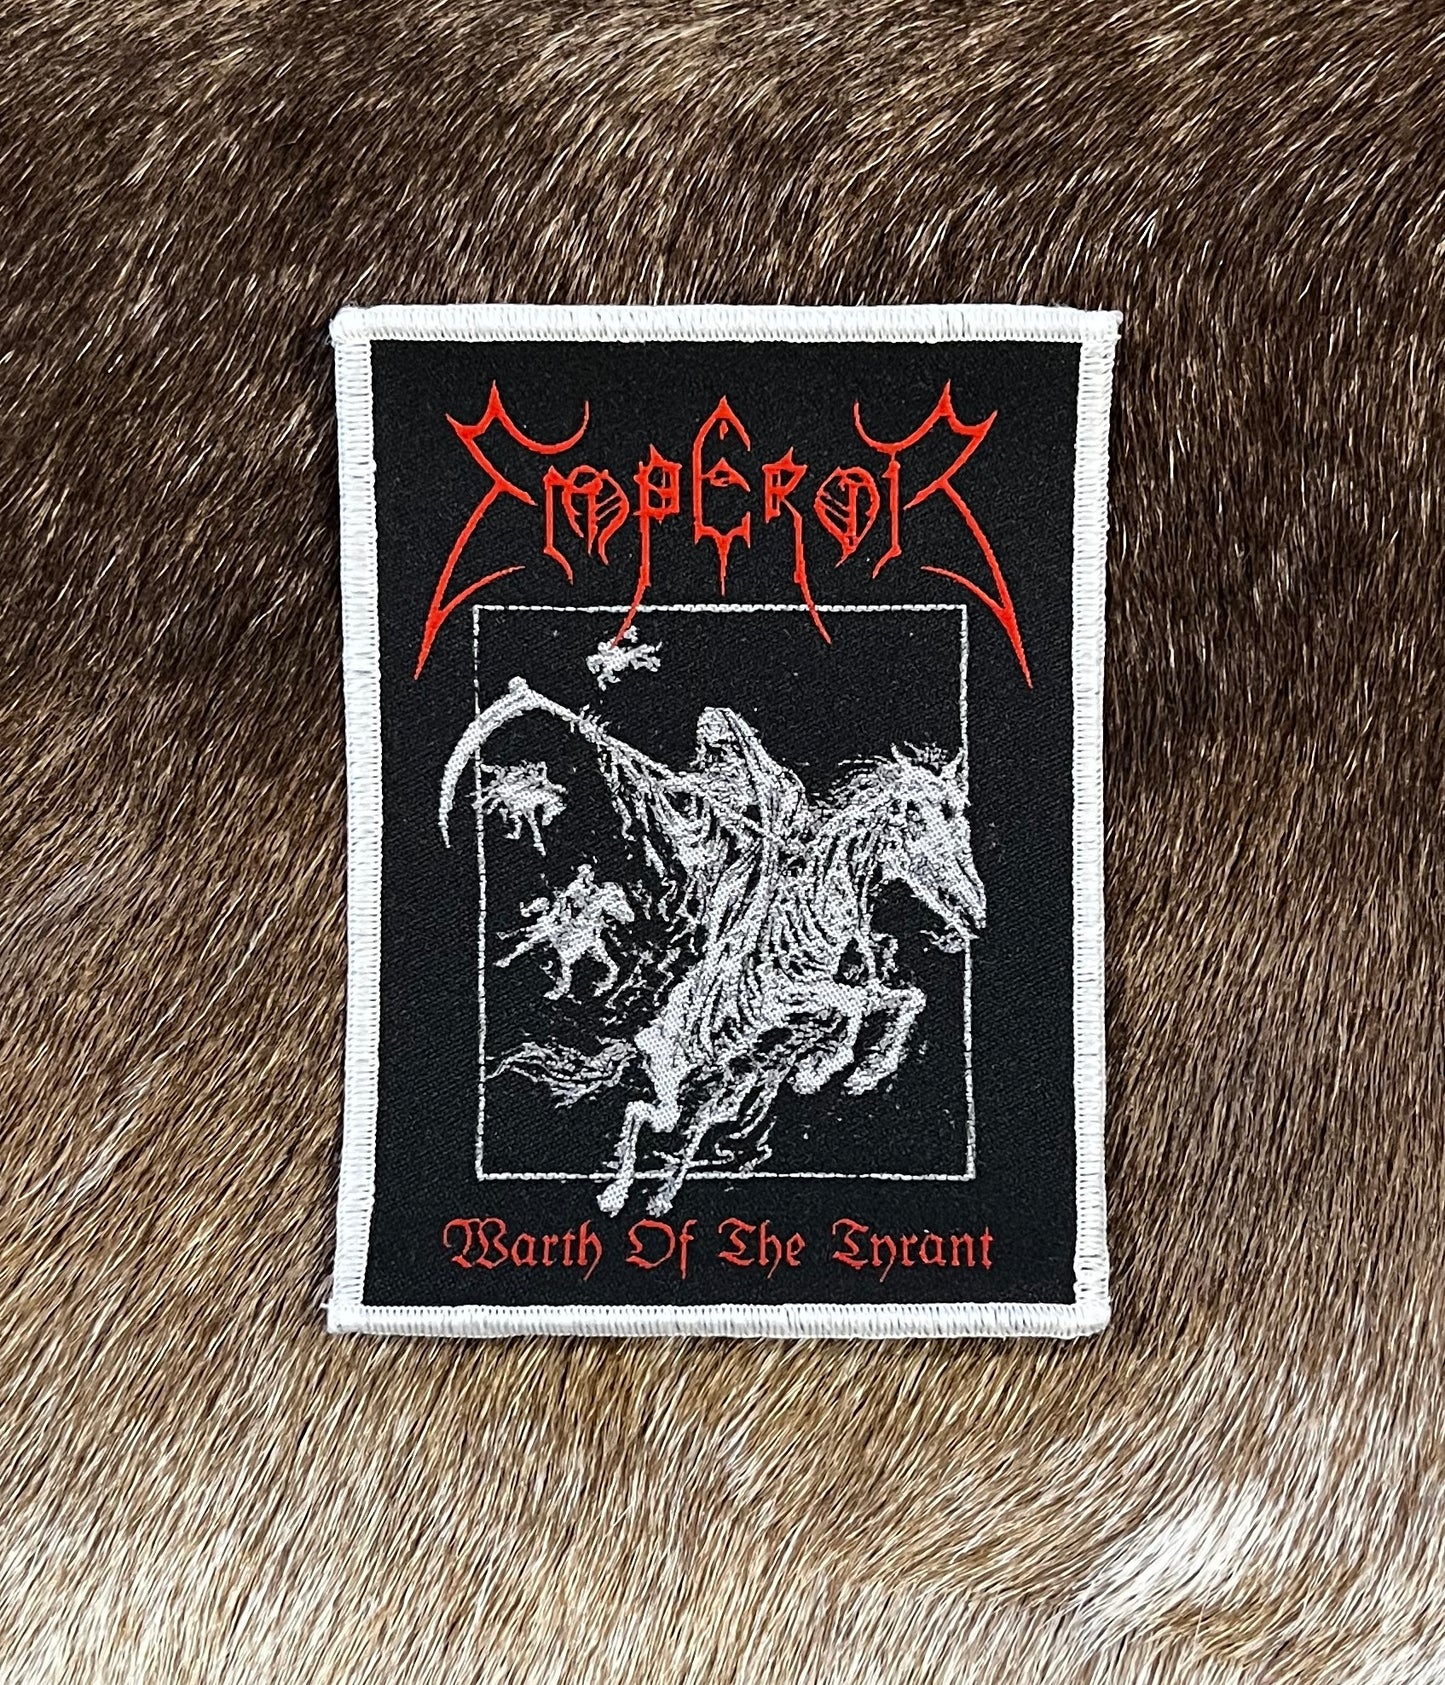 Emperor - Wrath Of The Tyrant Patch